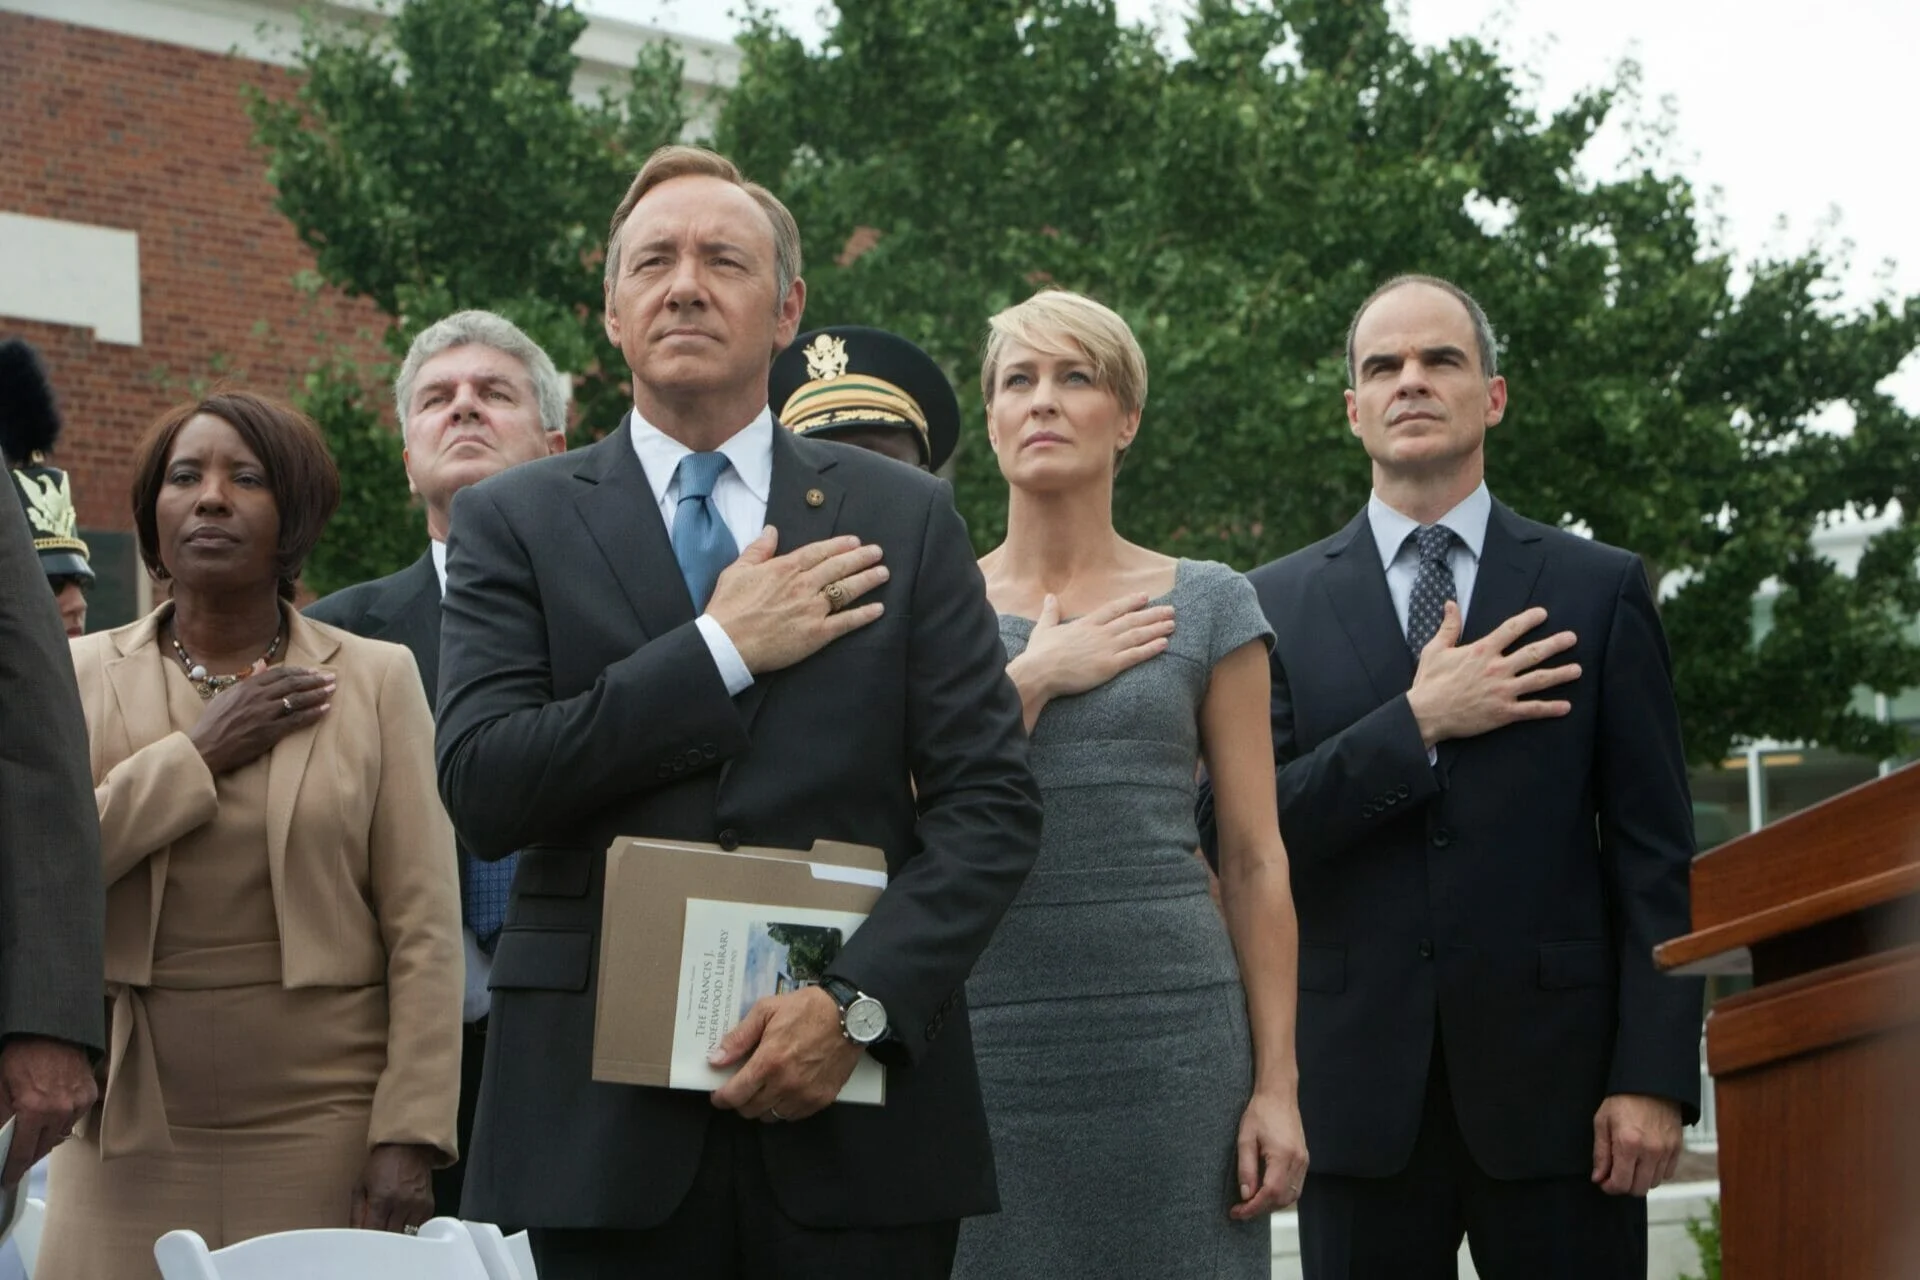 House of Cards offers a dark portrait of America